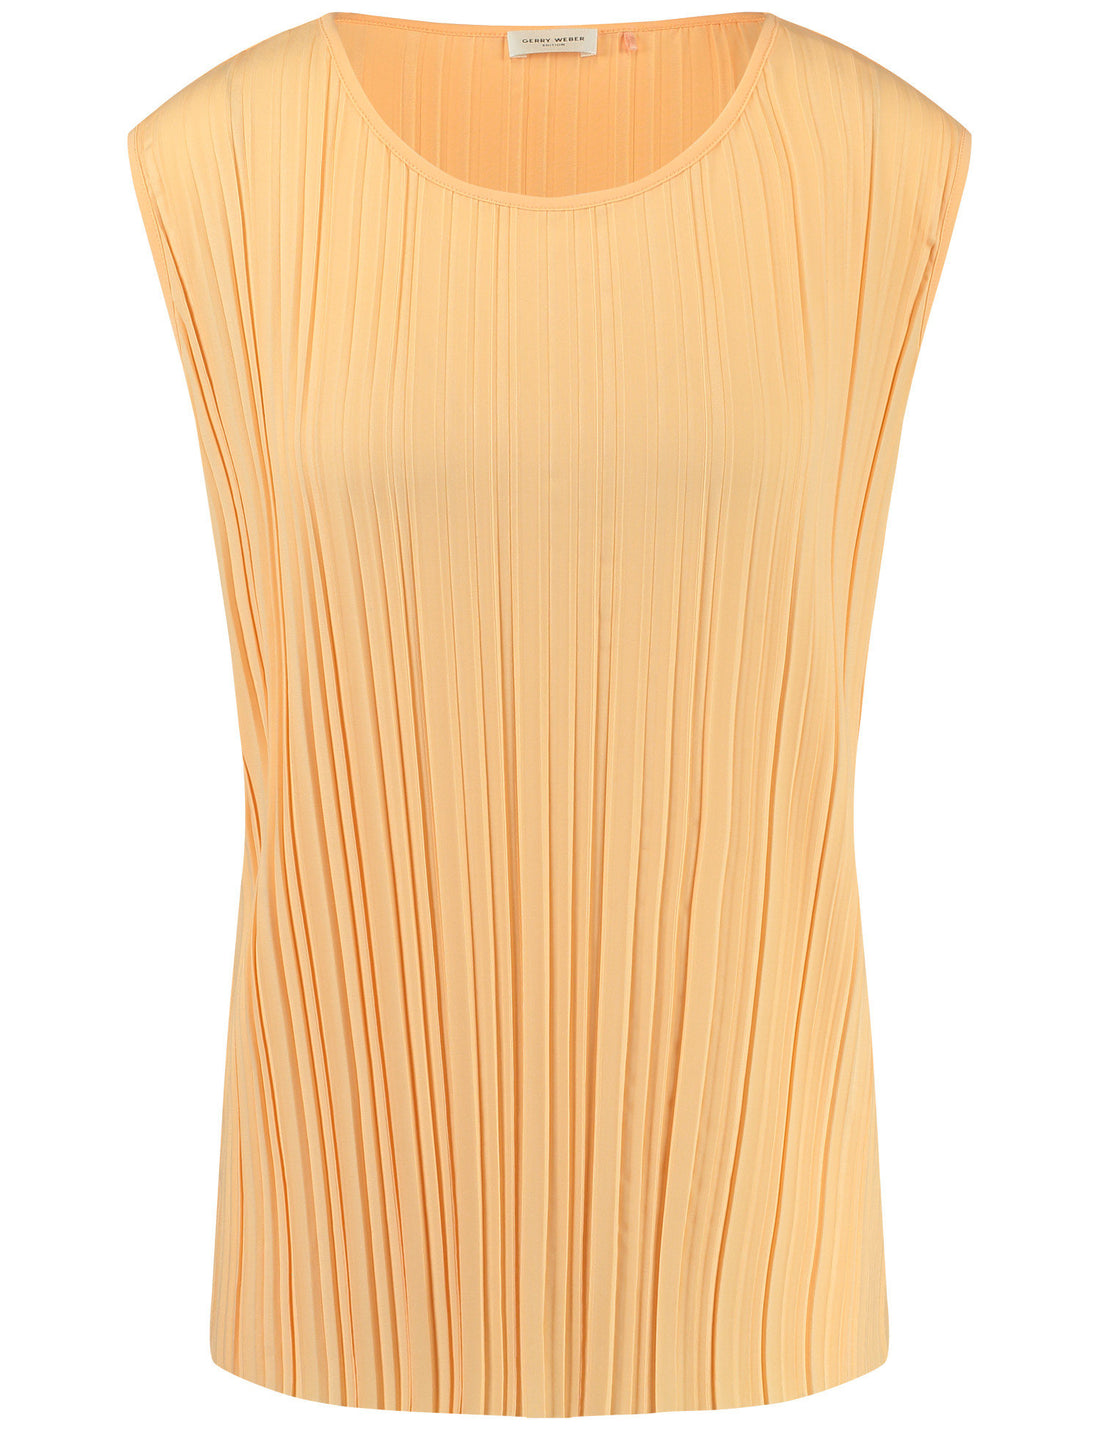 Sleeveless Pleated Blouse With Stretch For Comfort_270145-44084_60315_01